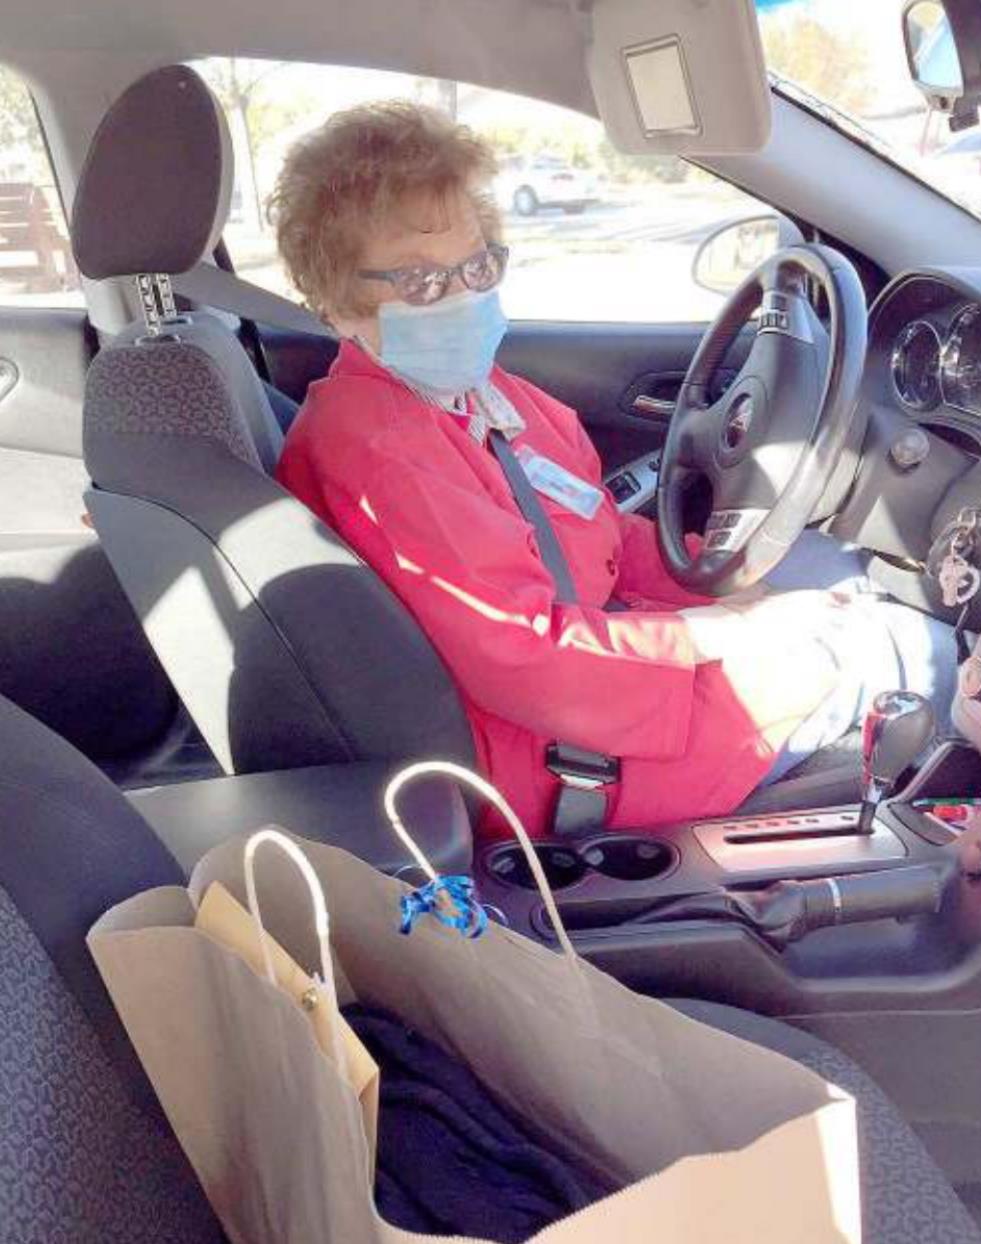 BETTY CADORET, a Foster Grandparent from Stockton, was recognized Monday, October 12th, with a drive-thru event hosted by the Fort Hays State University Foster Grandparent and Senior Companion Program held at Valley View Apartments. Betty received a “Thank You” bag for her dedication to the program.